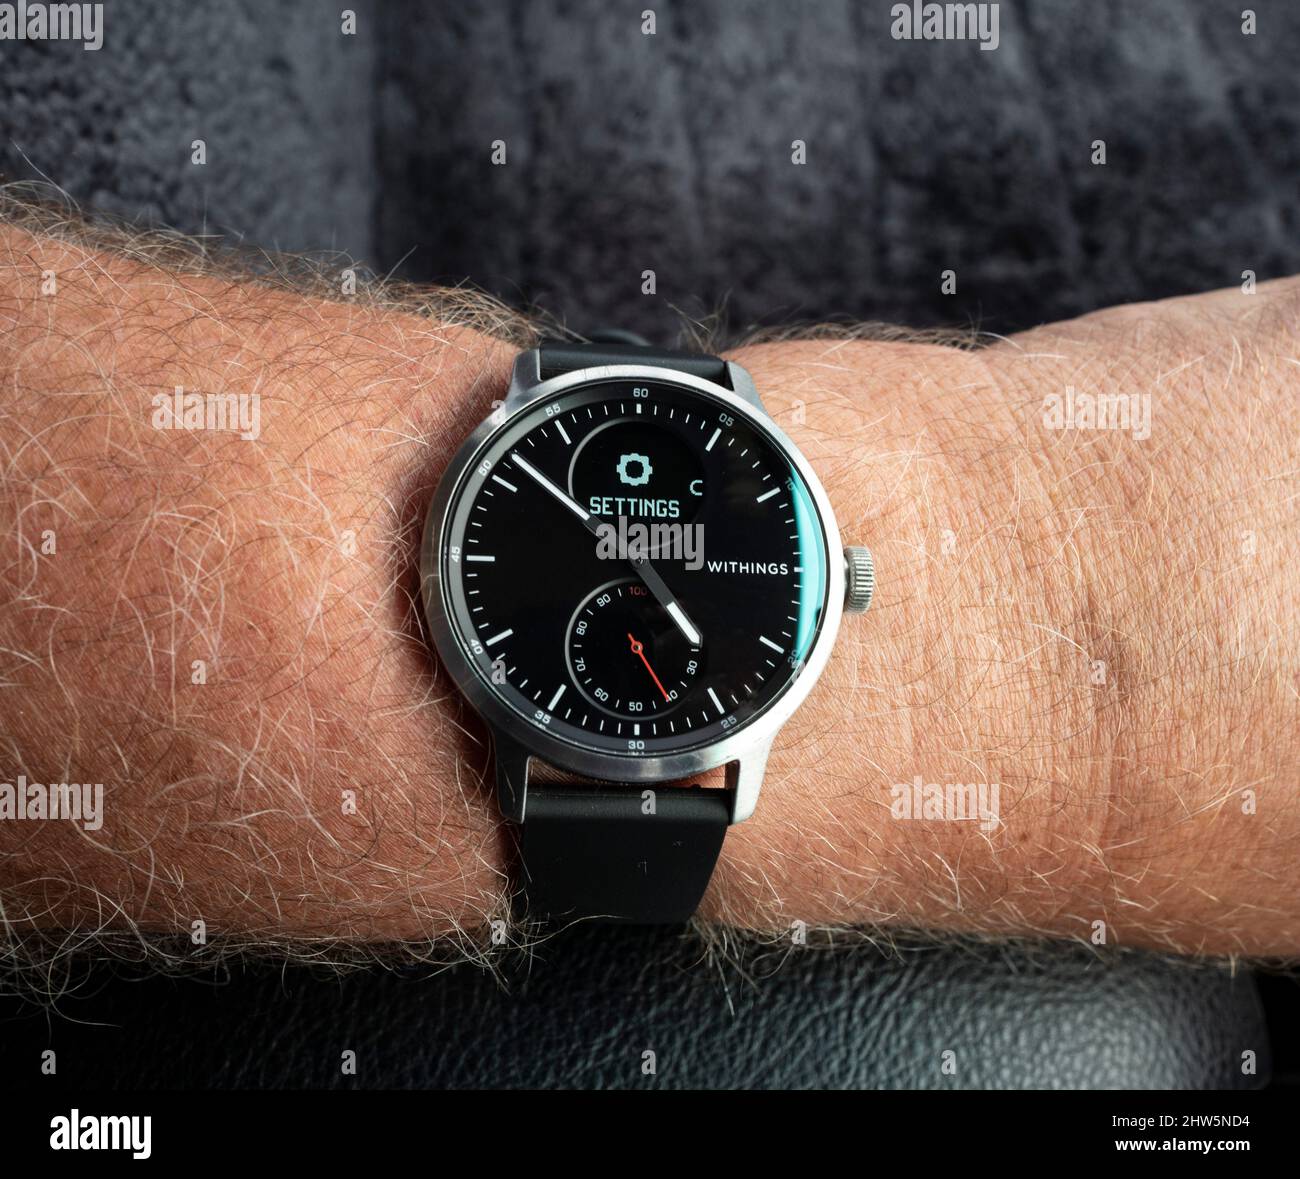 withings scanwatch 42mm black face showing settings icon Stock Photo